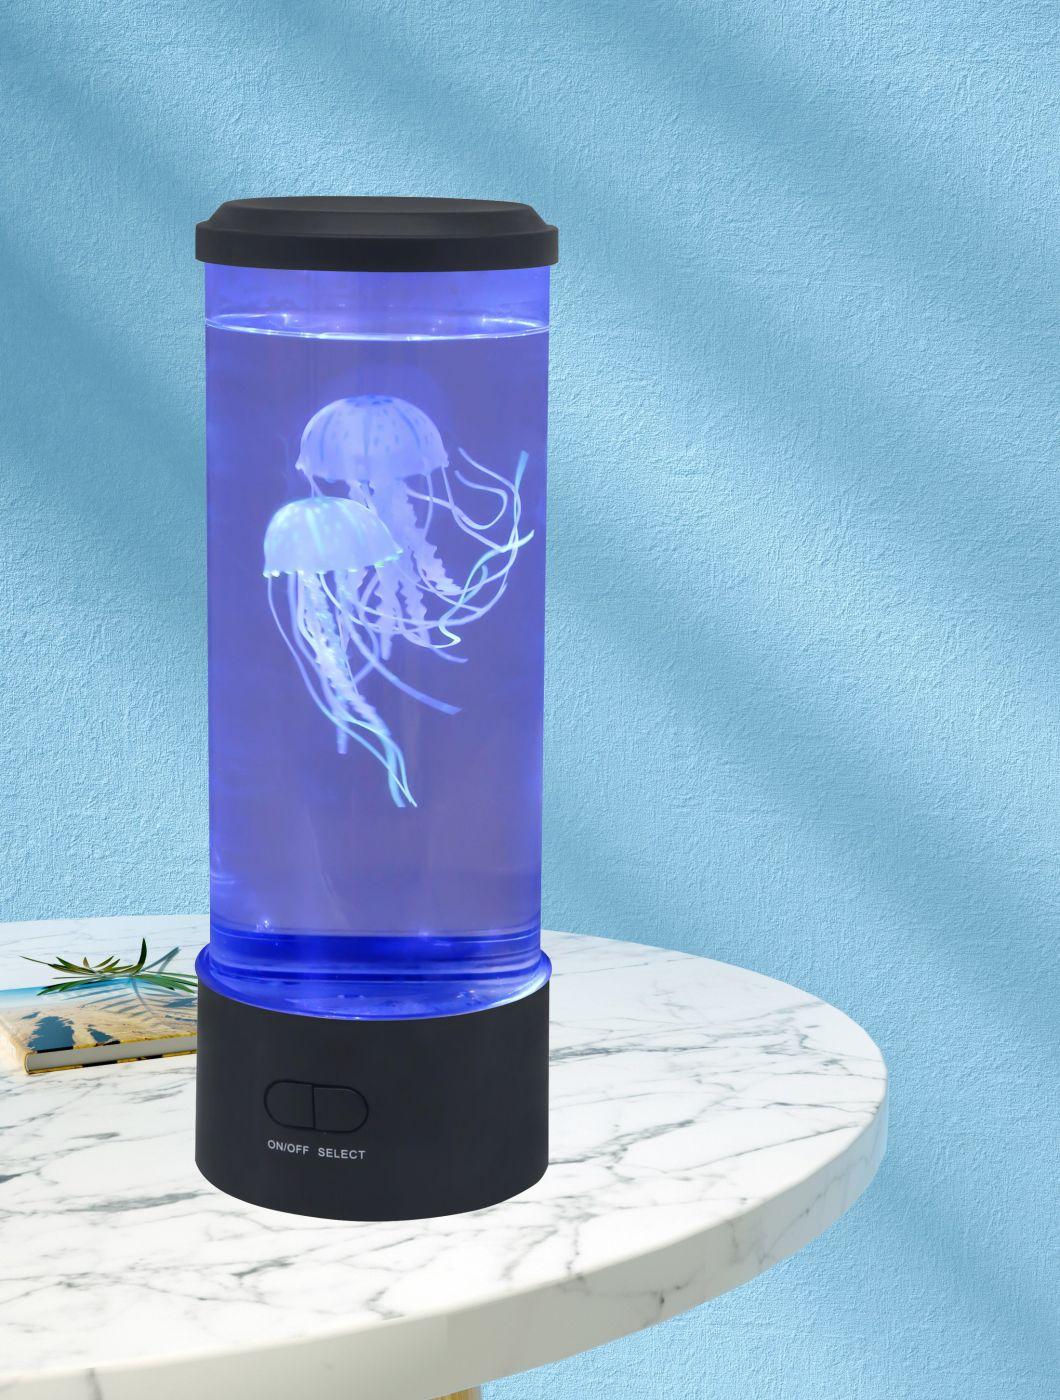 Best Seller Decorative Artificial Aquarium Color - Morphing Jellyfish Lamp with Remote Control